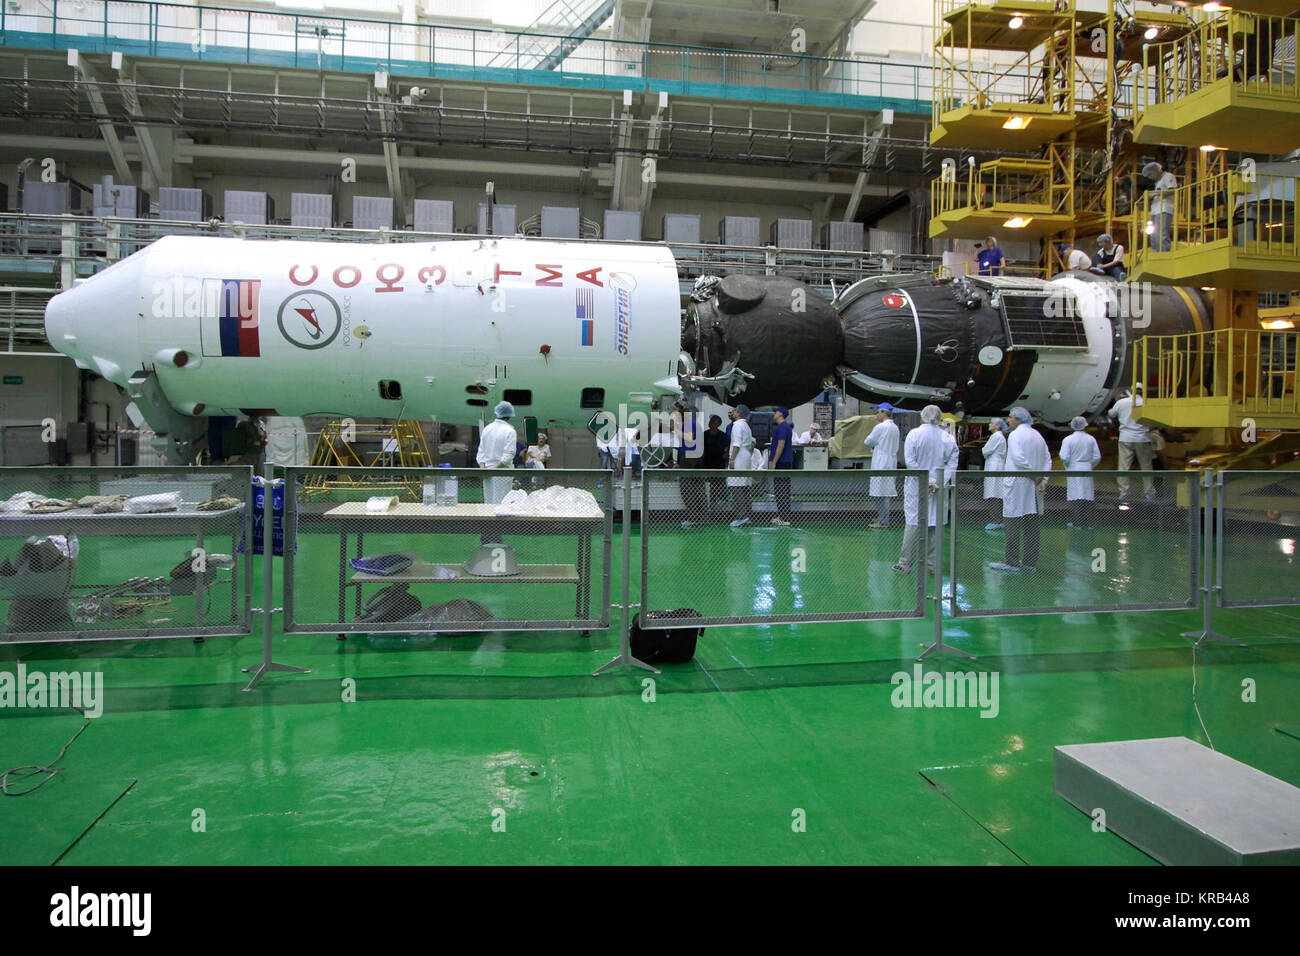 At the Baikonur Cosmodrome in Kazakhstan, the Soyuz TMA-05M spacecraft (right) is readied for its encapsulation into the upper stage of its Soyuz booster (left) July 8, 2012 in advance of its rollout to the launch pad July 12 and the launch of its occupants, Expedition 32/33 Soyuz Commander Yuri Malenchenko, NASA Flight Engineer Sunita Williams and Flight Engineer Aki Hoshide of the Japan Aerospace Exploration Agency July 15 for a four-month mission on the International Space Station.  NASA/Victor Zelentsov Soyuz TMA-05M spacecraft integration facility 3 Stock Photo